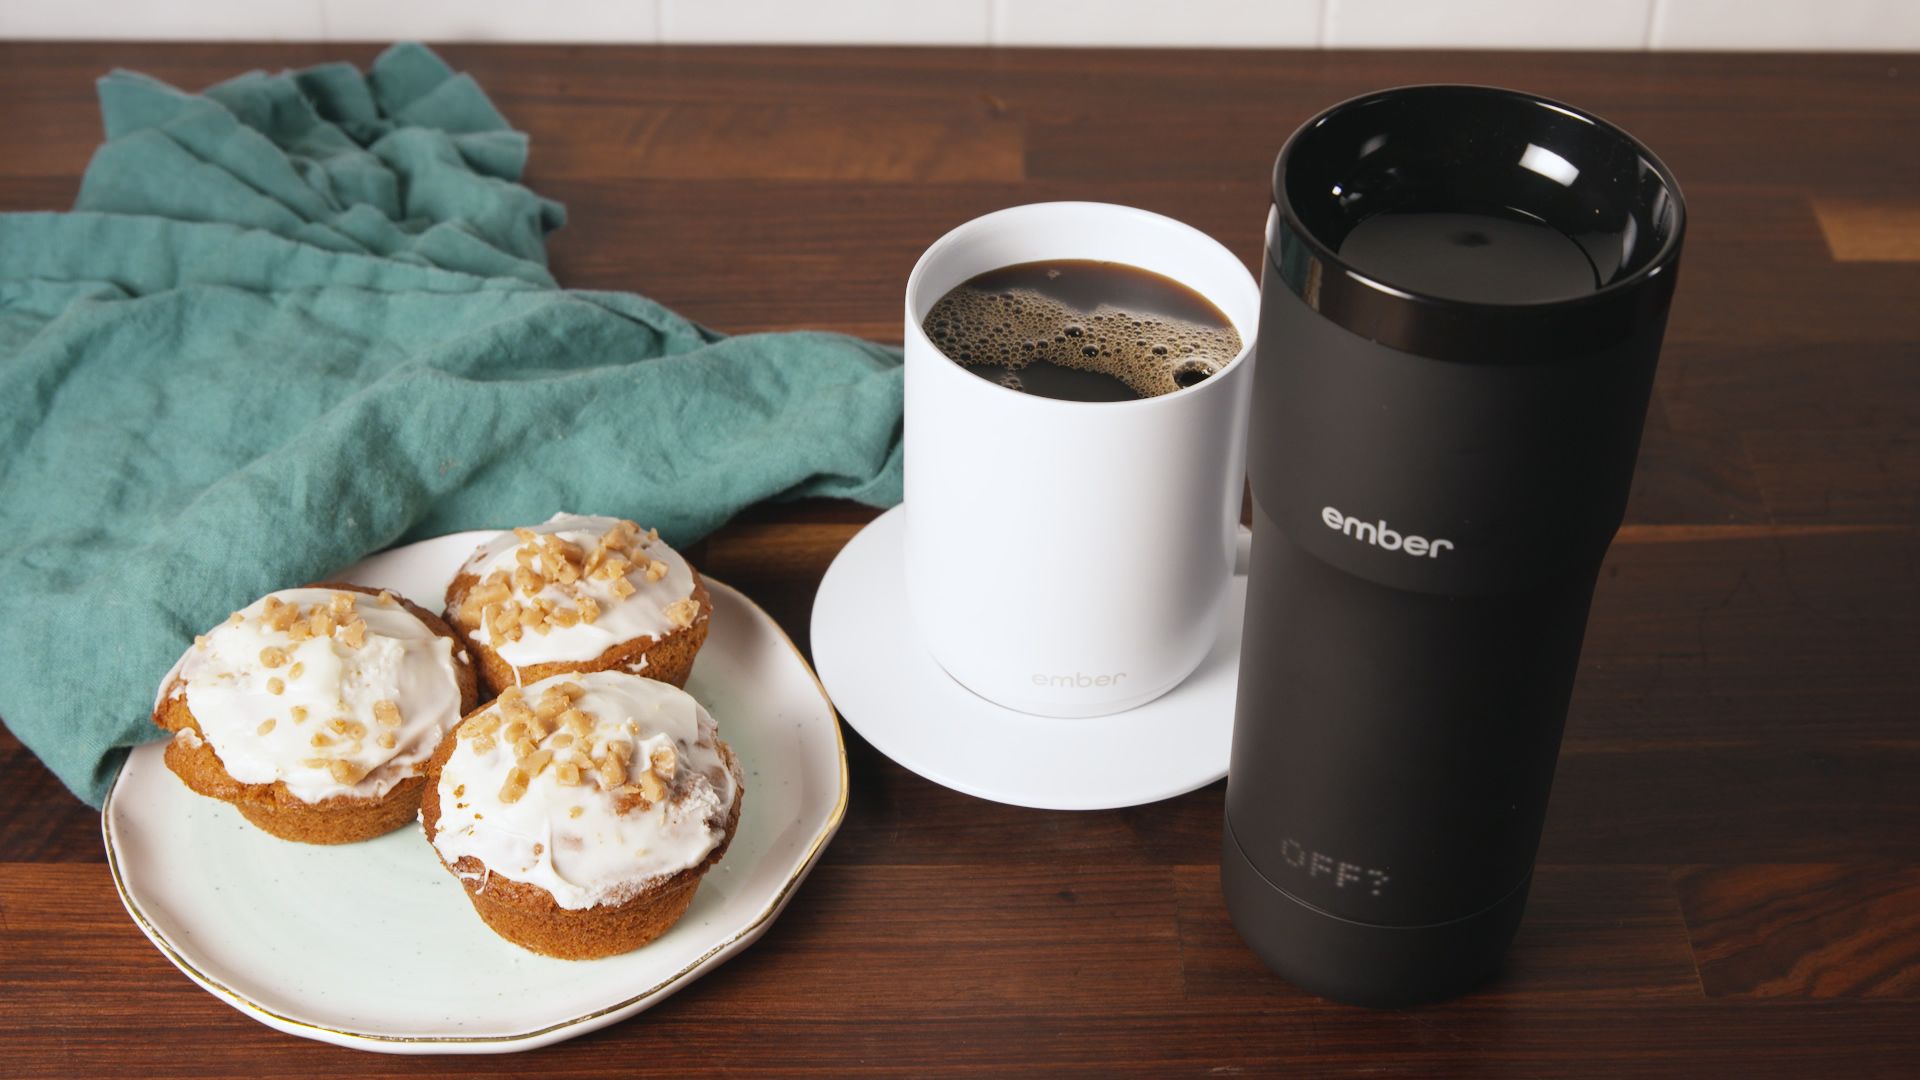 Starbucks Is Now Selling $150 Smart Ember Temperature Control Mugs